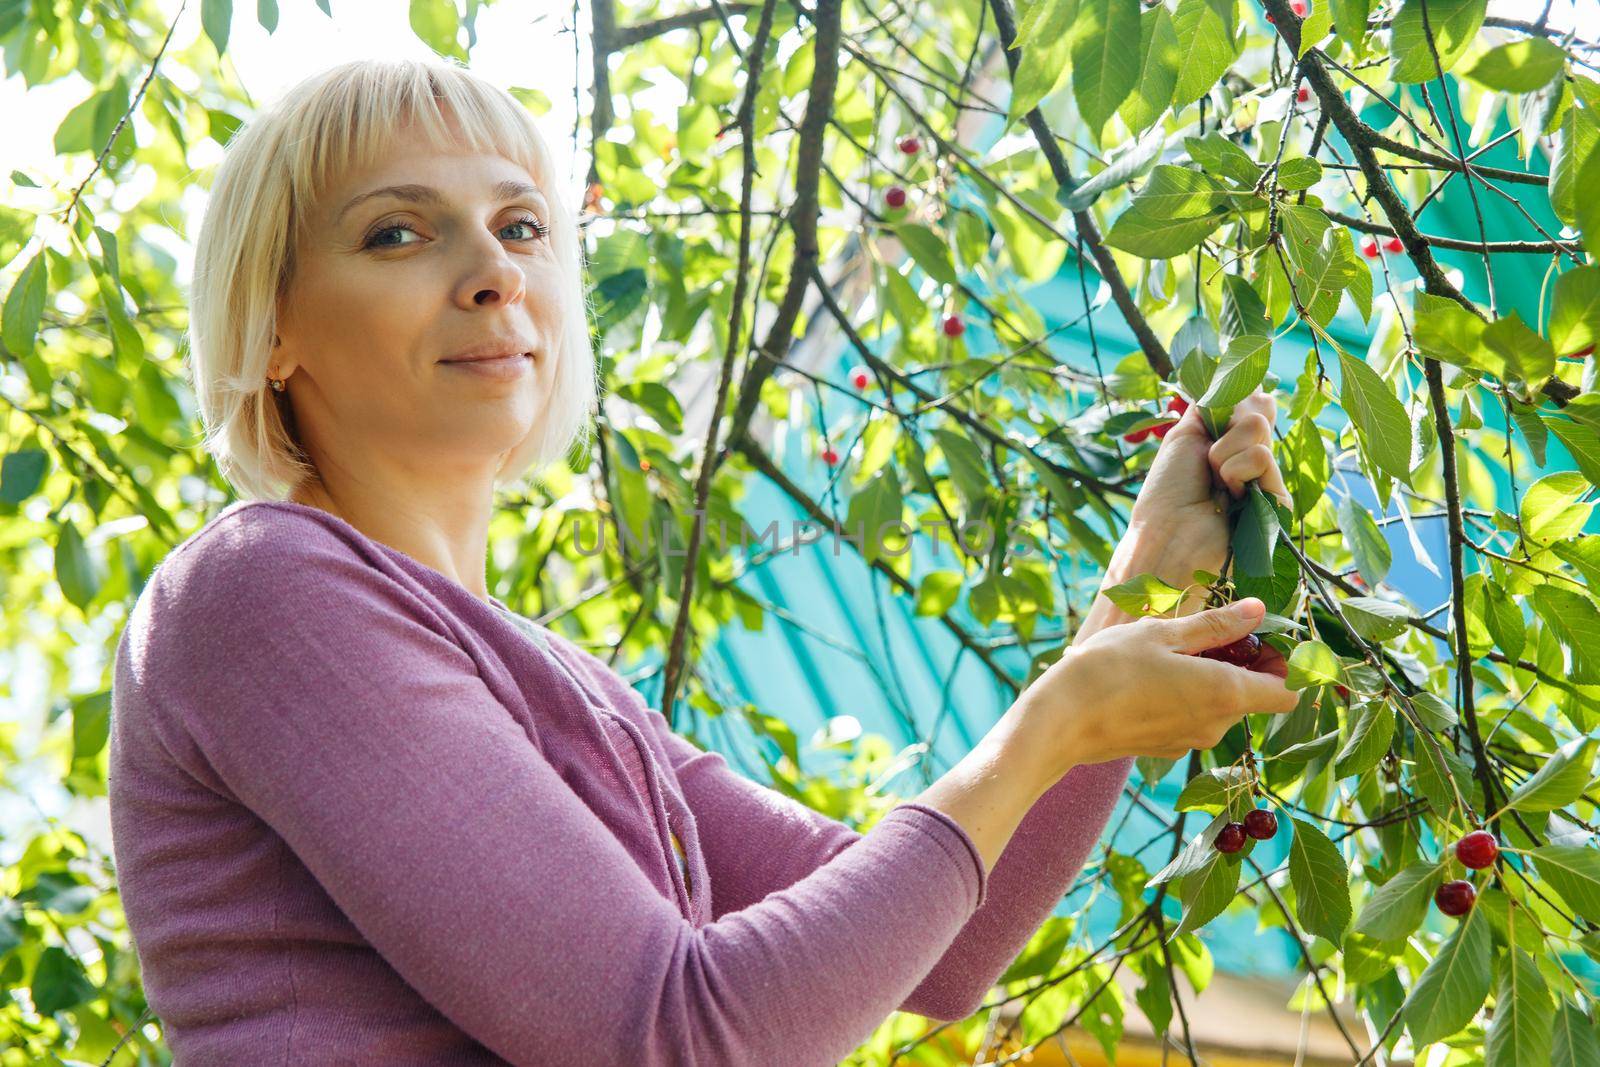 A smiling young woman gathering cherries in the garden